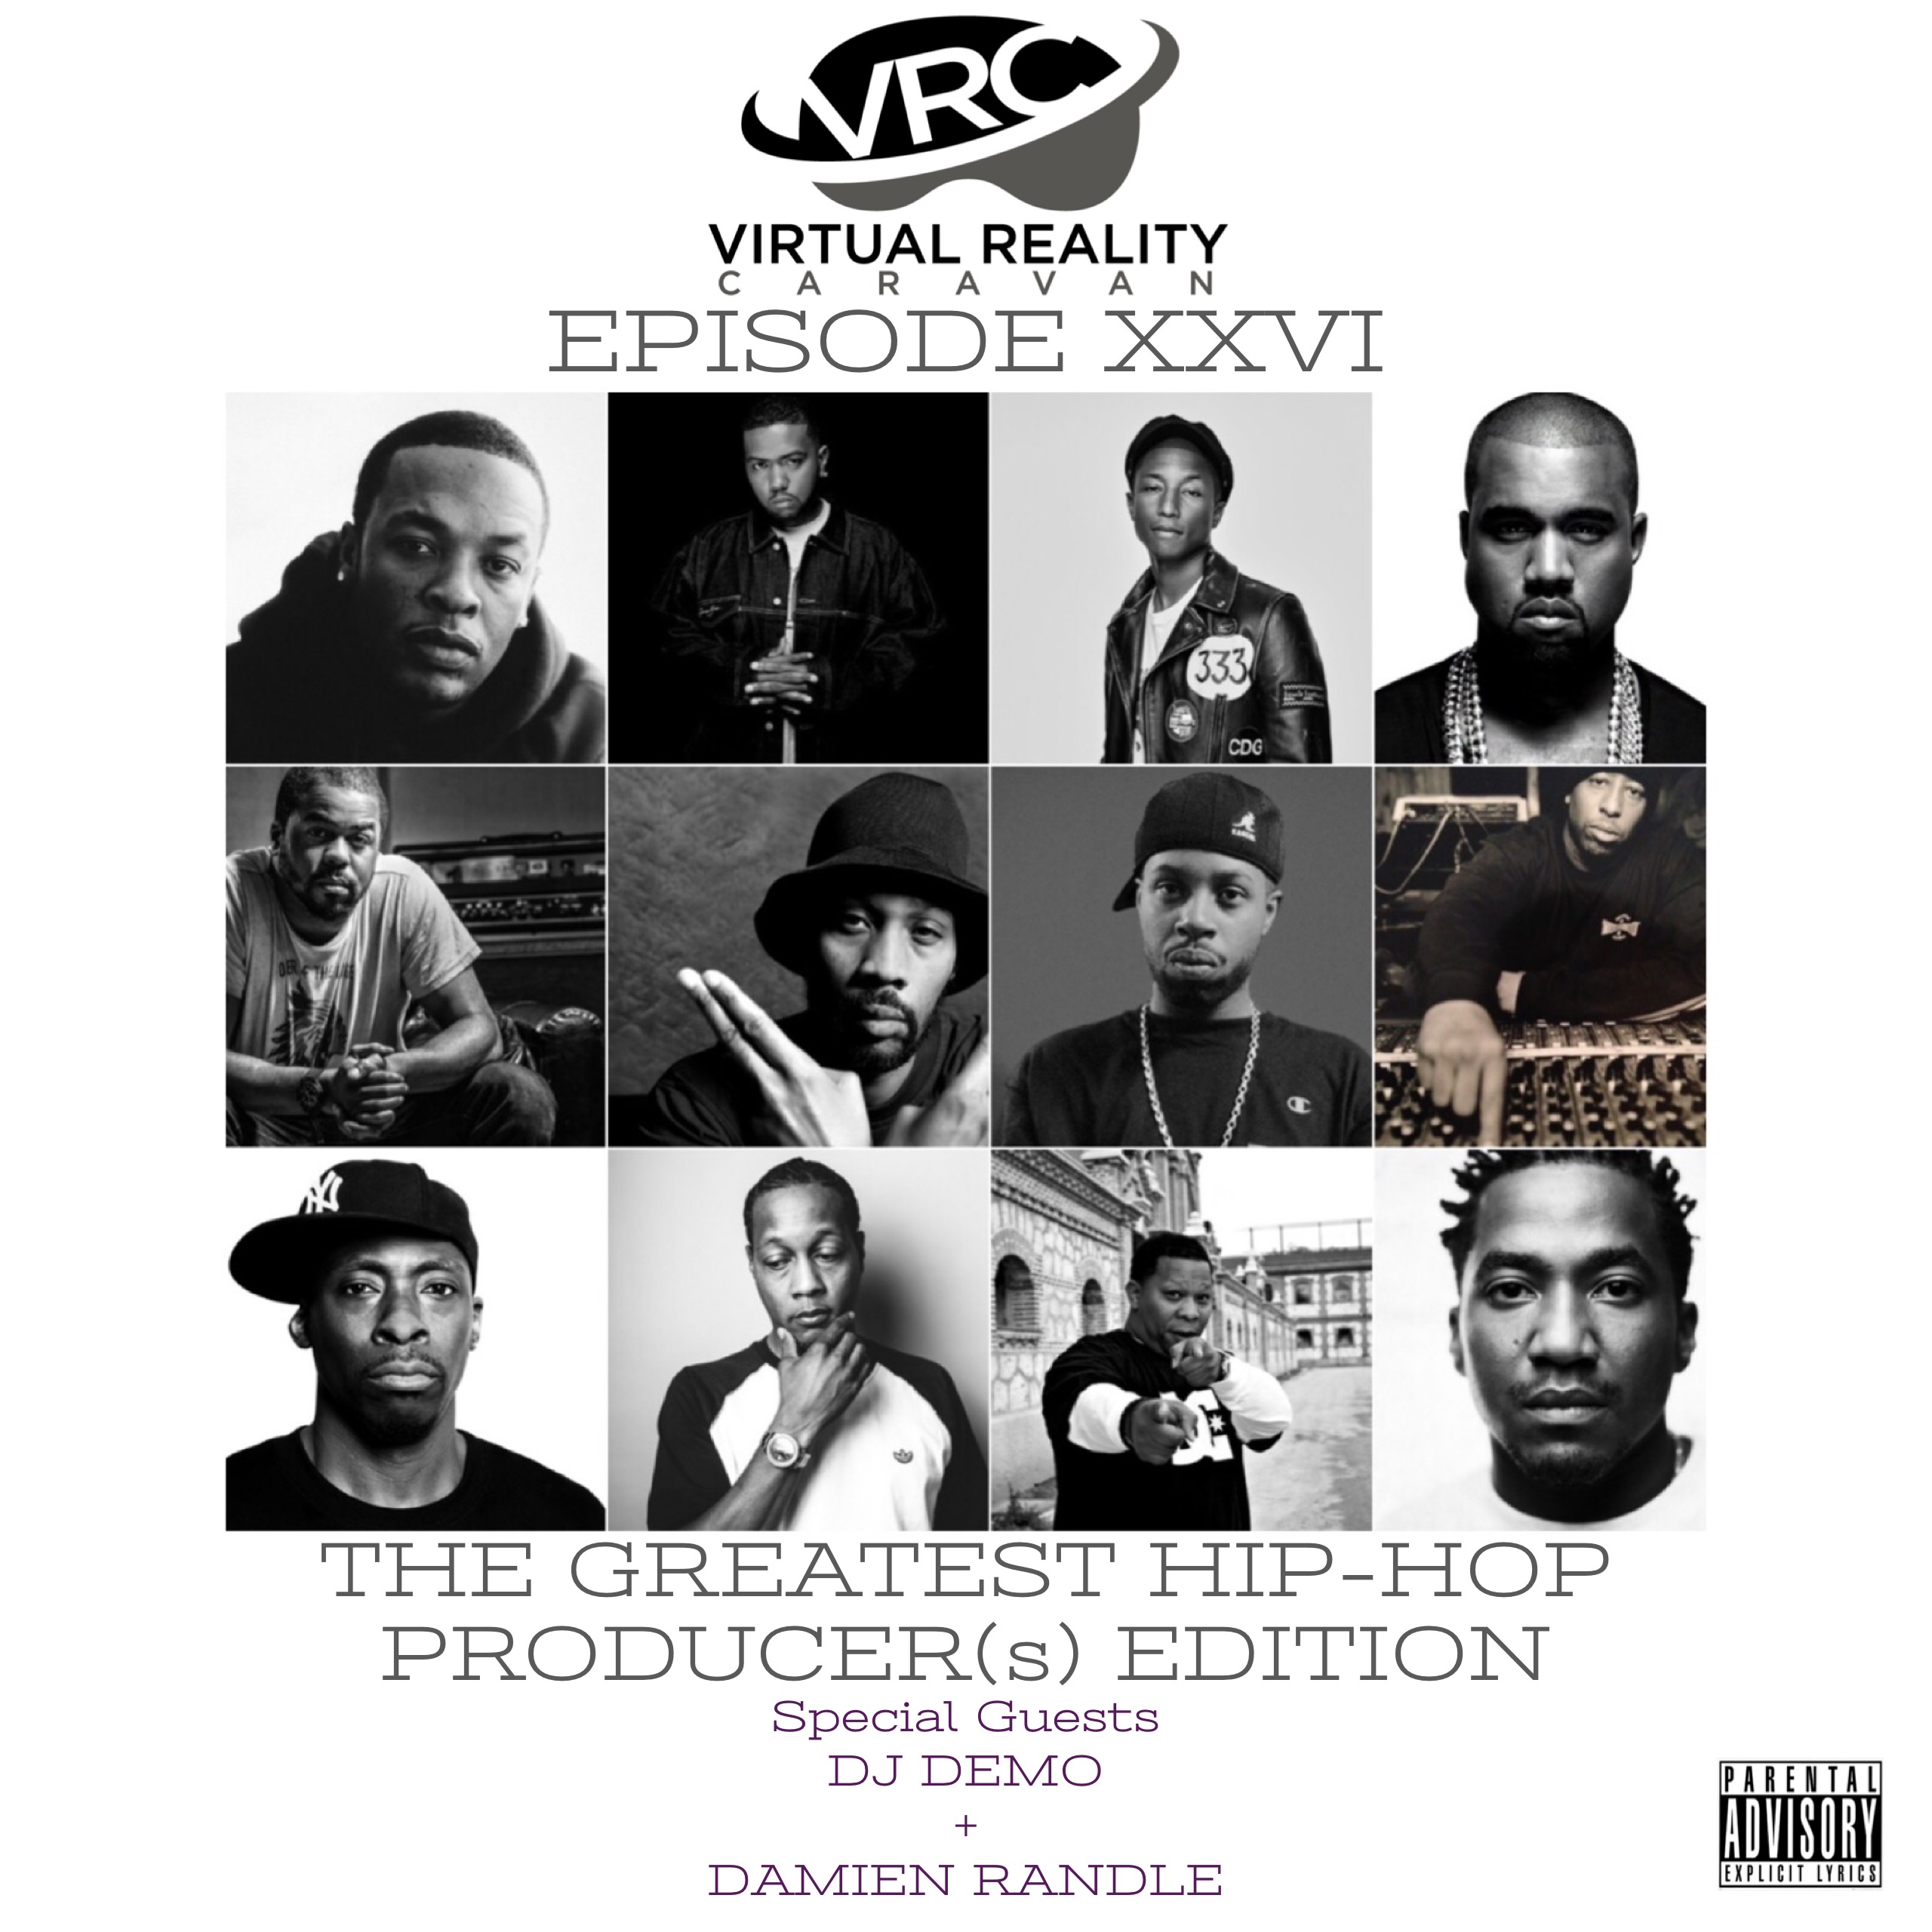 Virtual Reality Caravan (Podcast): Episode 26 – The Greatest Hip-Hop Producer(s) of All Time Edition